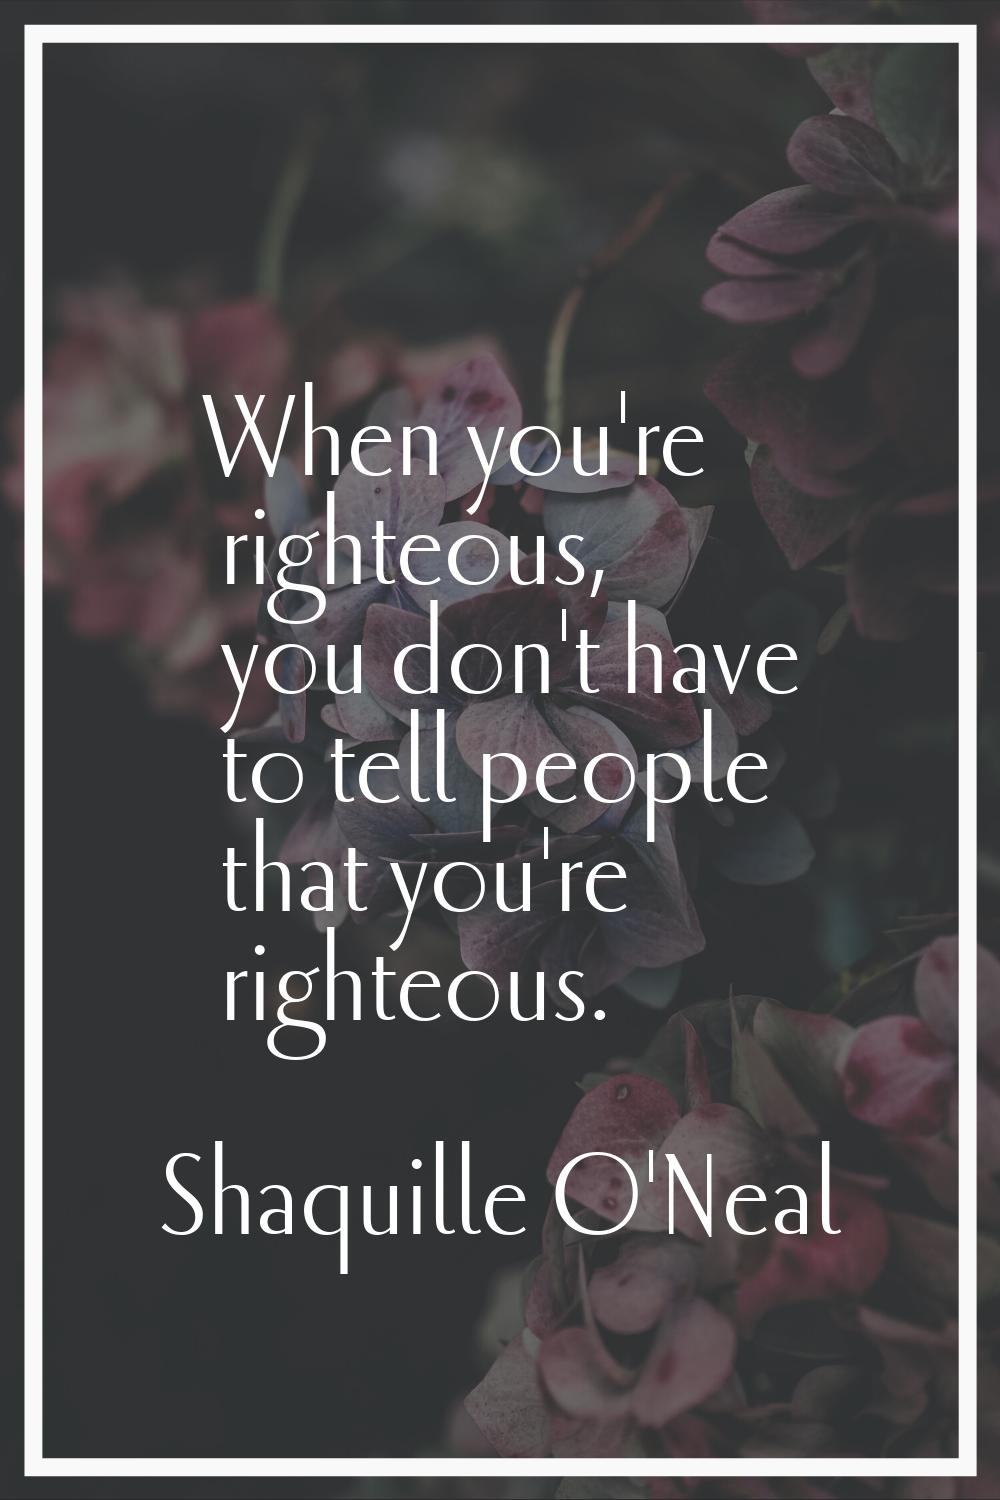 When you're righteous, you don't have to tell people that you're righteous.